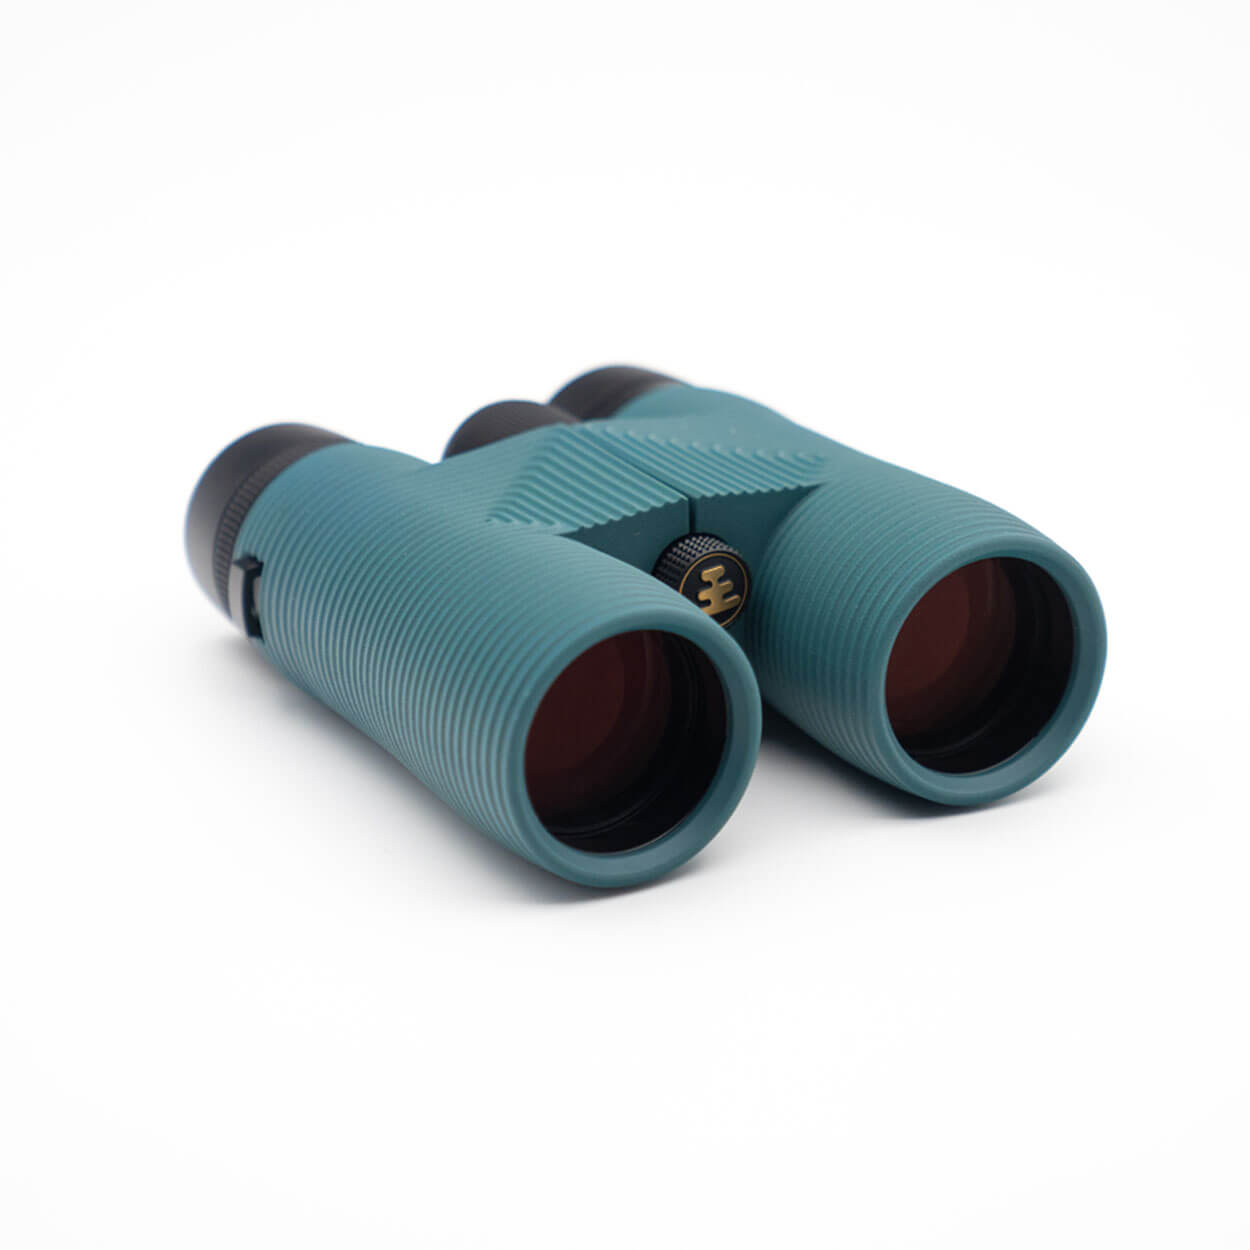 Featured product image for Pro Issue Waterproof Binoculars